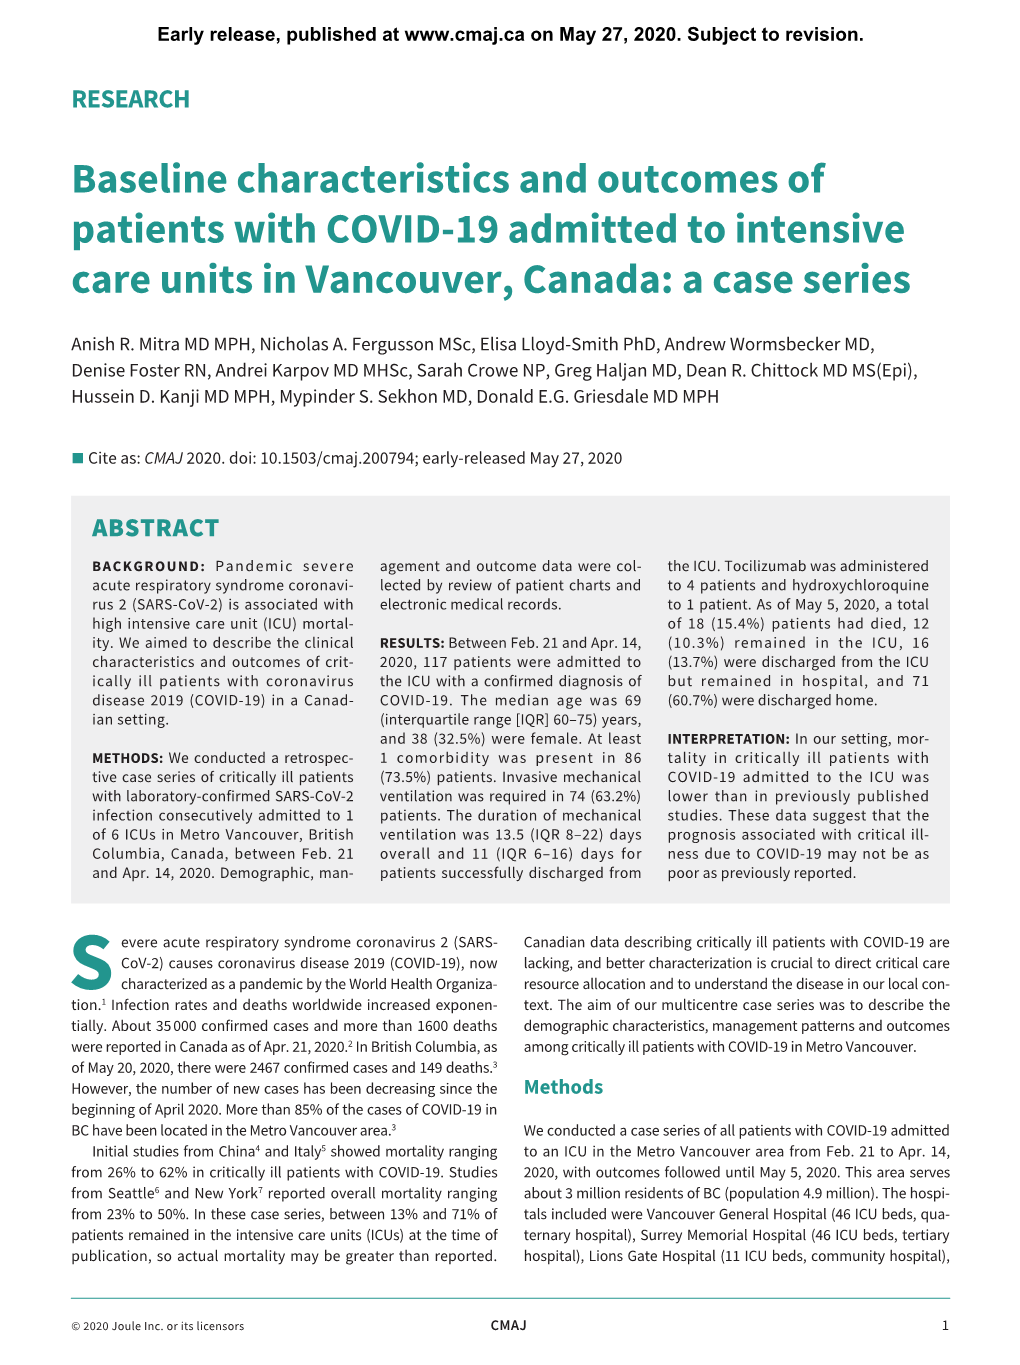 Baseline Characteristics and Outcomes of Patients with COVID-19 Admitted to Intensive Care Units in Vancouver, Canada: a Case Series